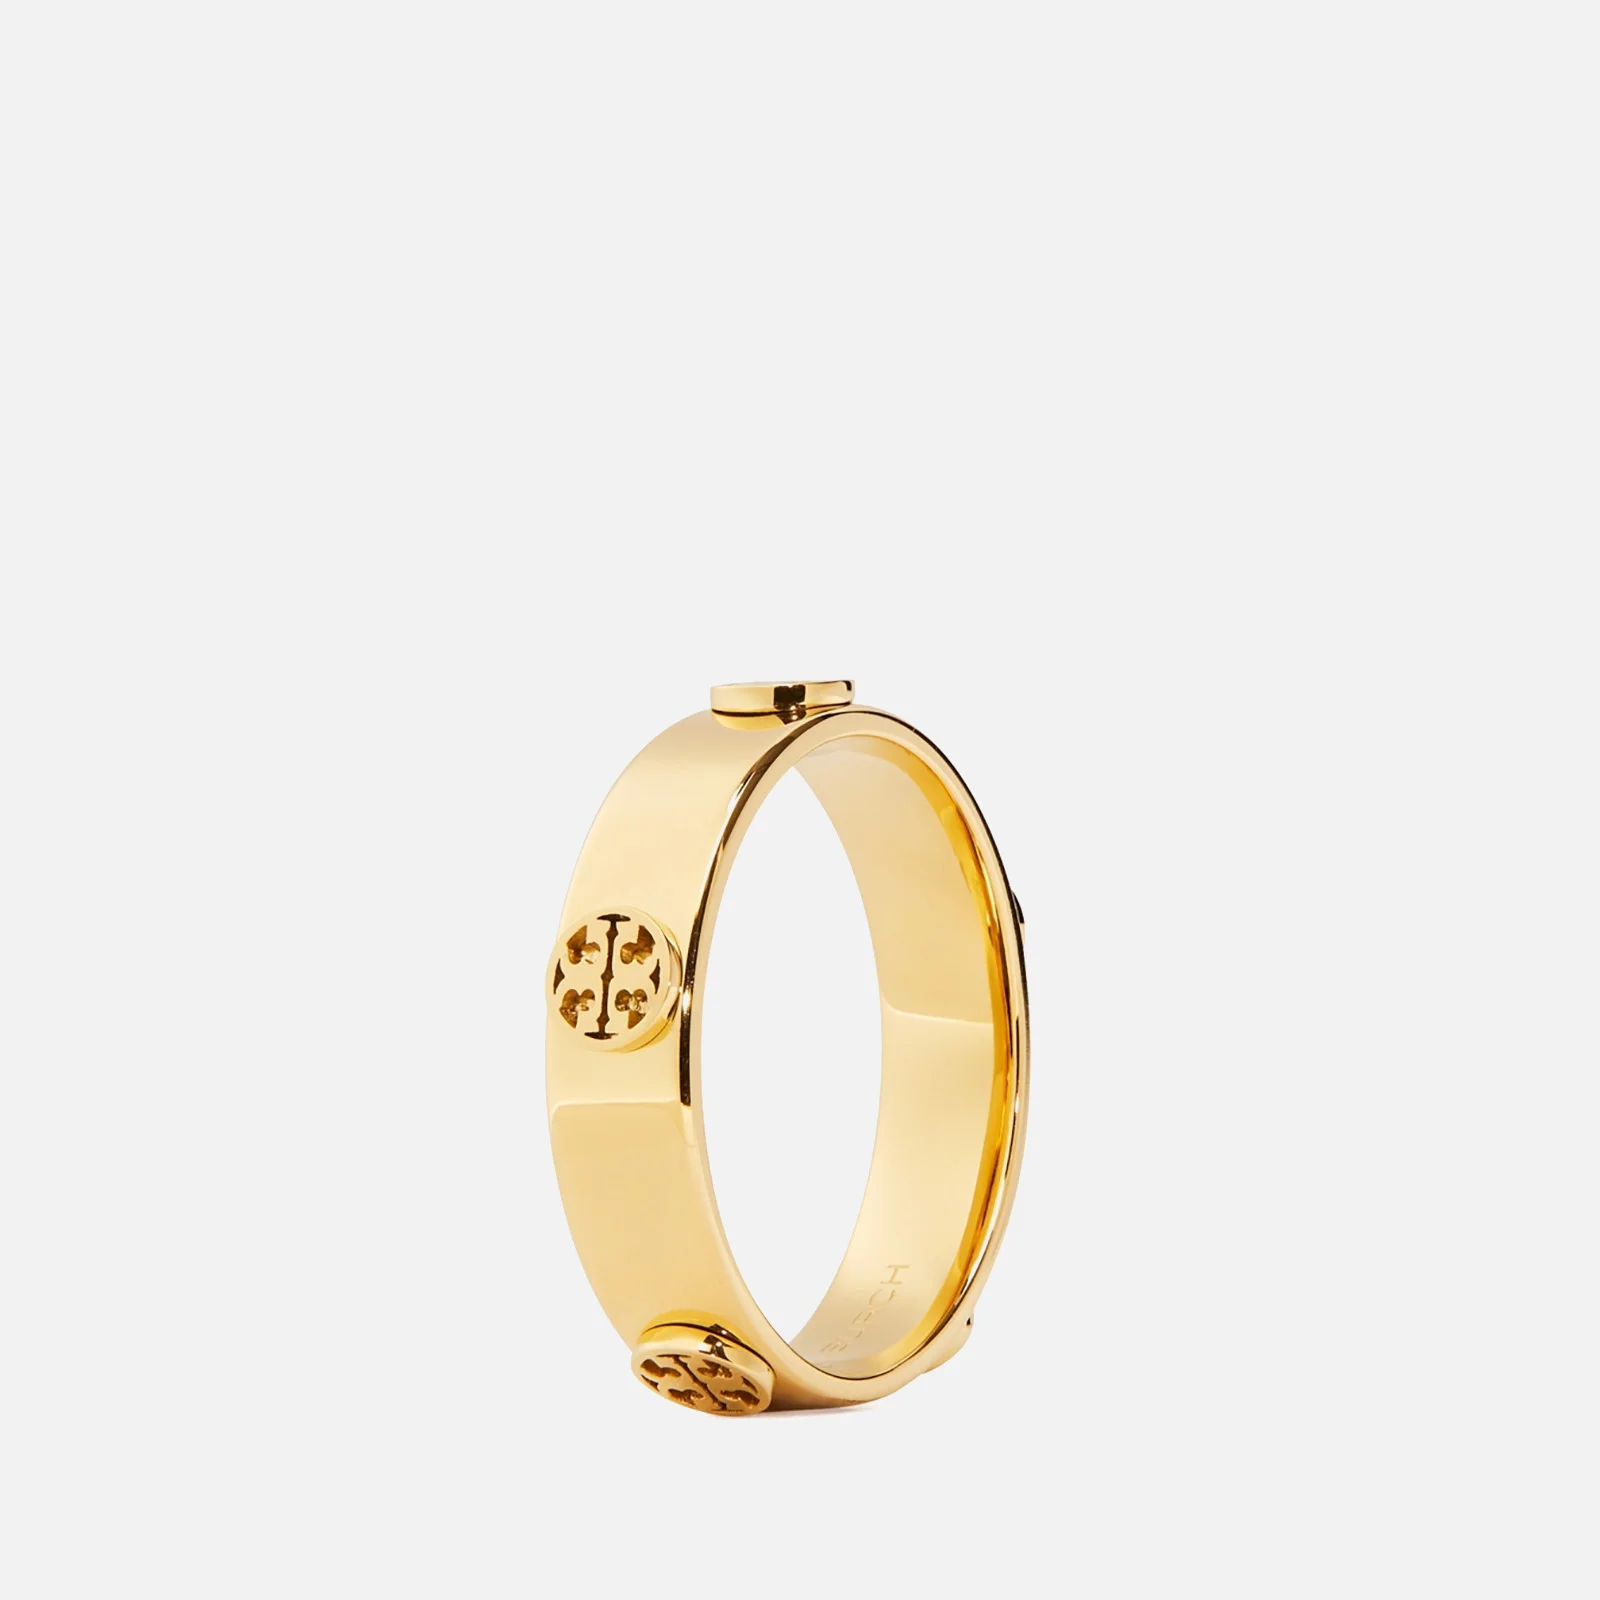 Tory Burch Women's Miller Stud Ring - Tory Gold Image 1